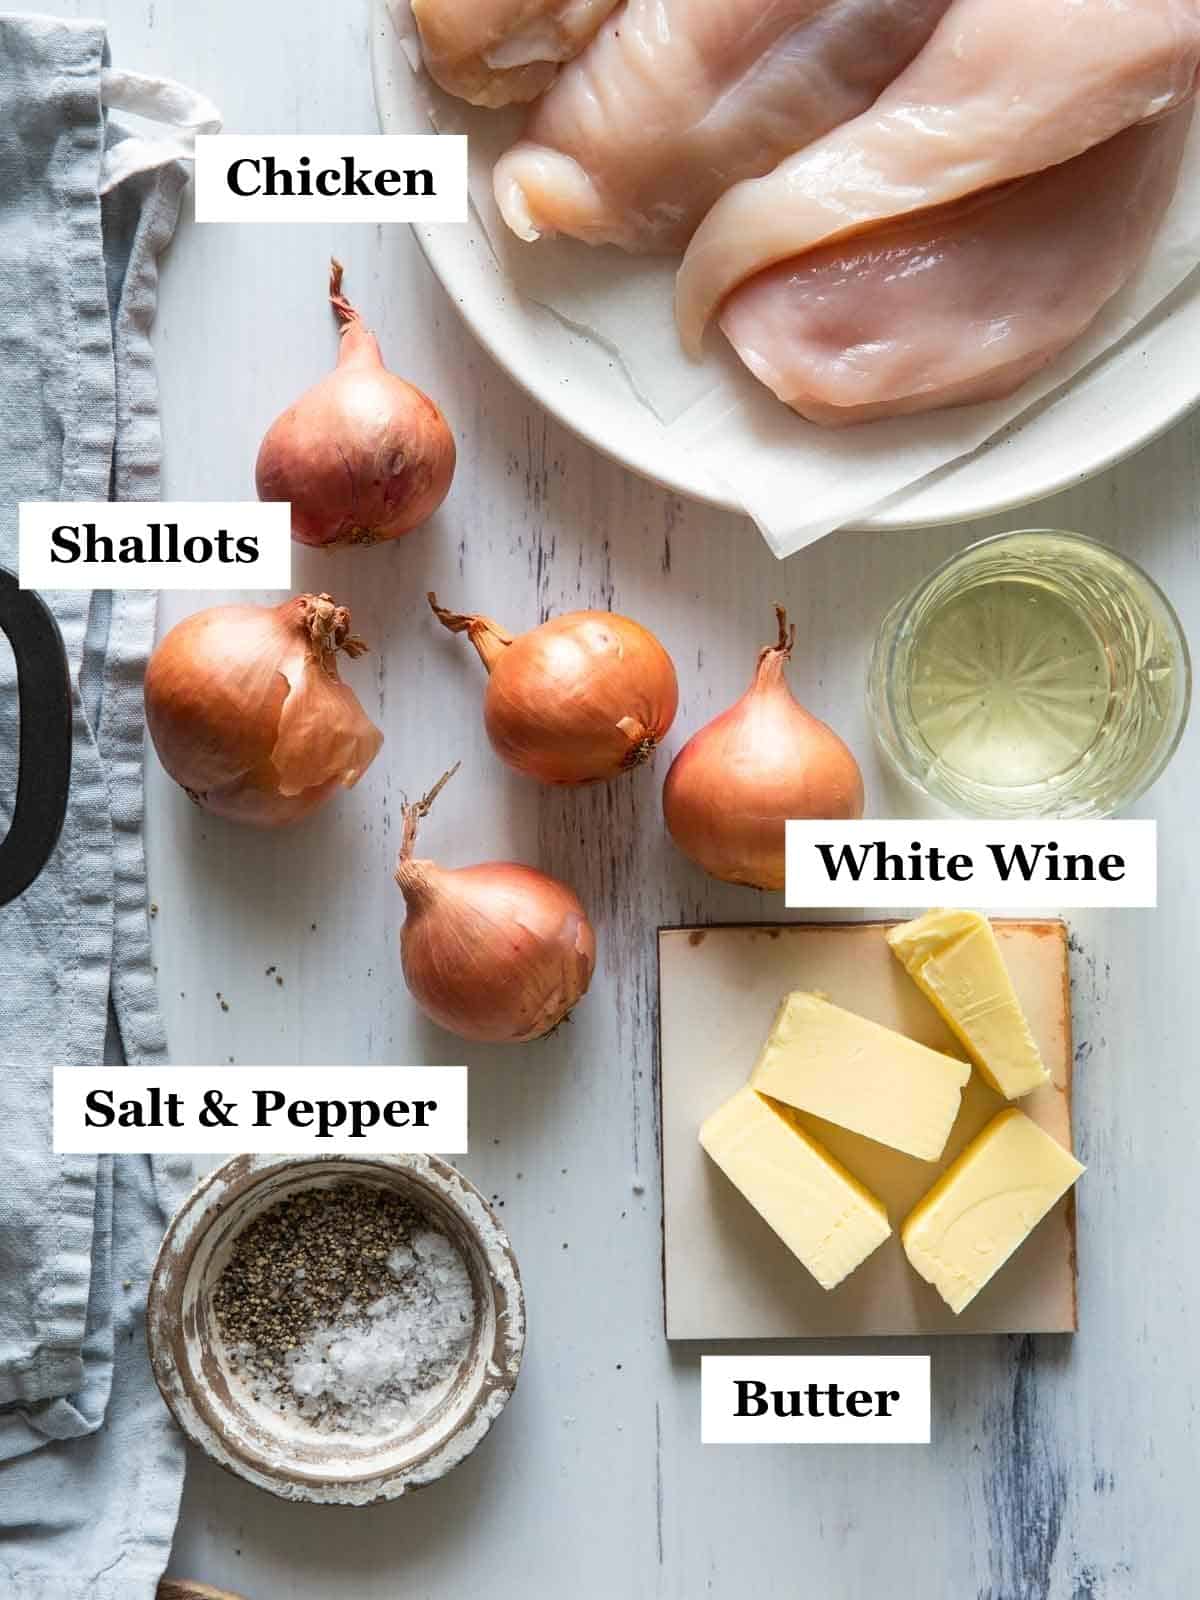 The ingredients of chicken with shallots laid out on a light background.